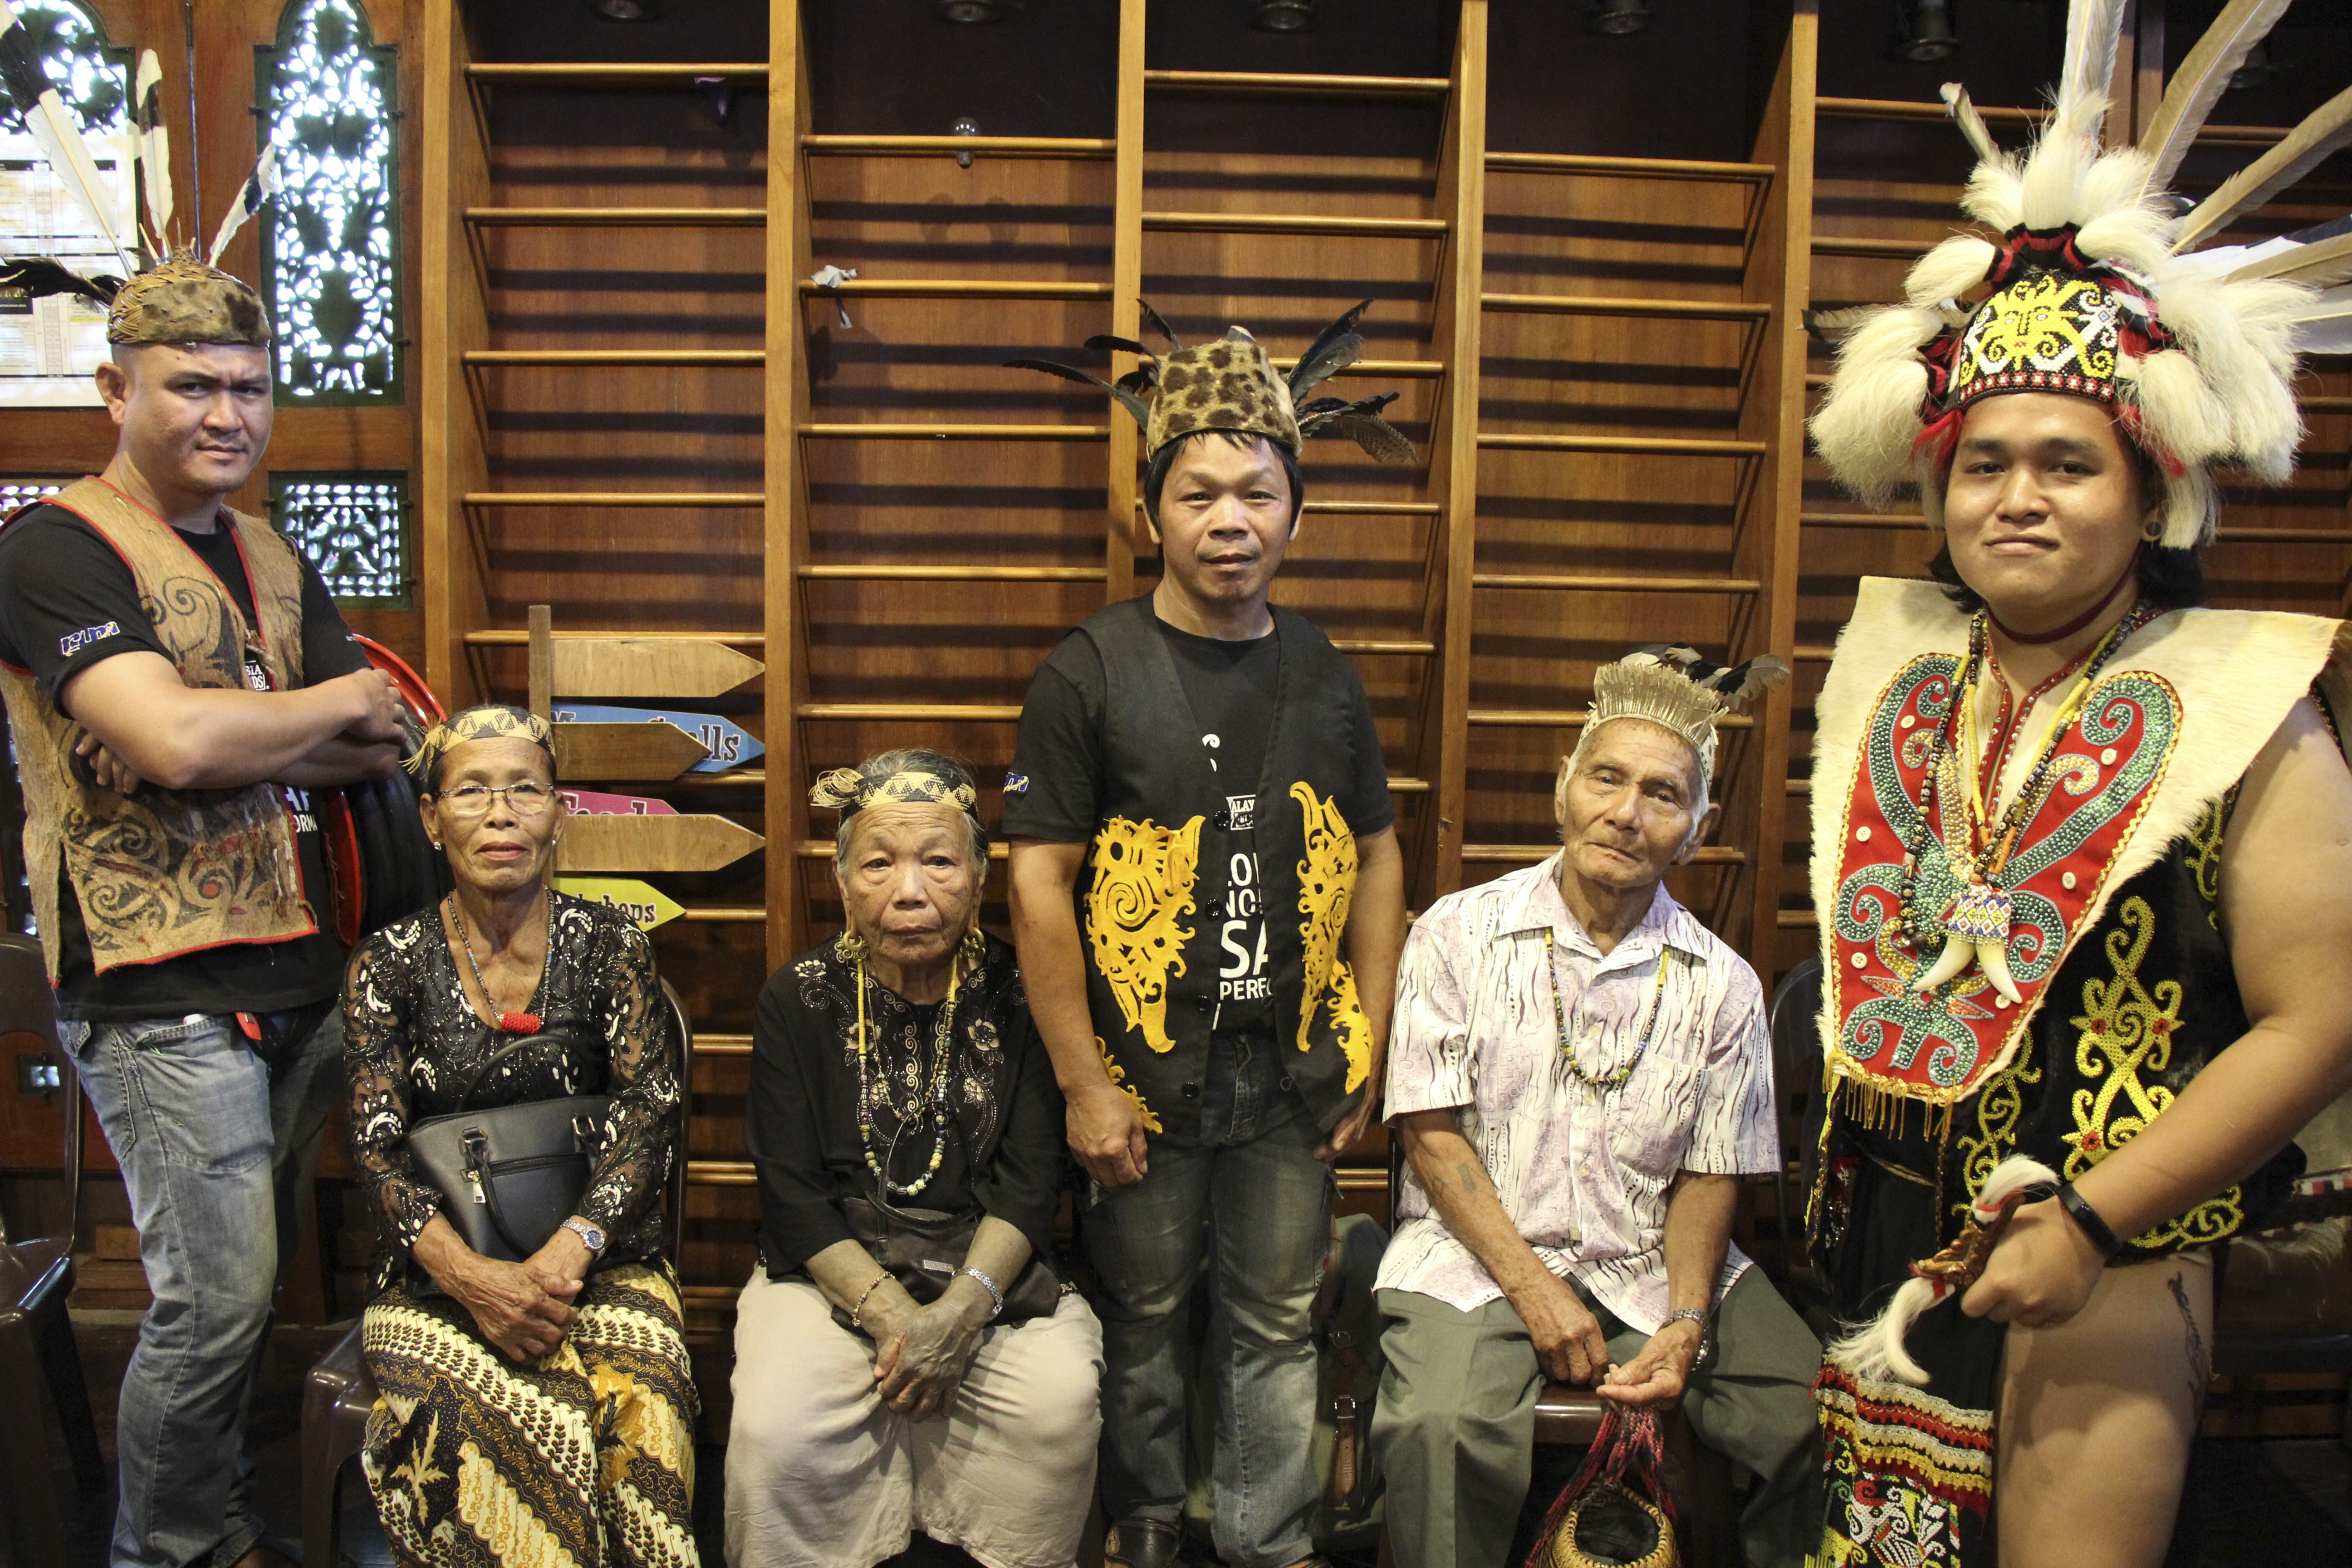 A mystical storyteller (far right) from the Kenyah tribe and other locals at the Borneo Jazz Festival, in Sarawak, Malaysia, in July 2019. Photo: John Brunton